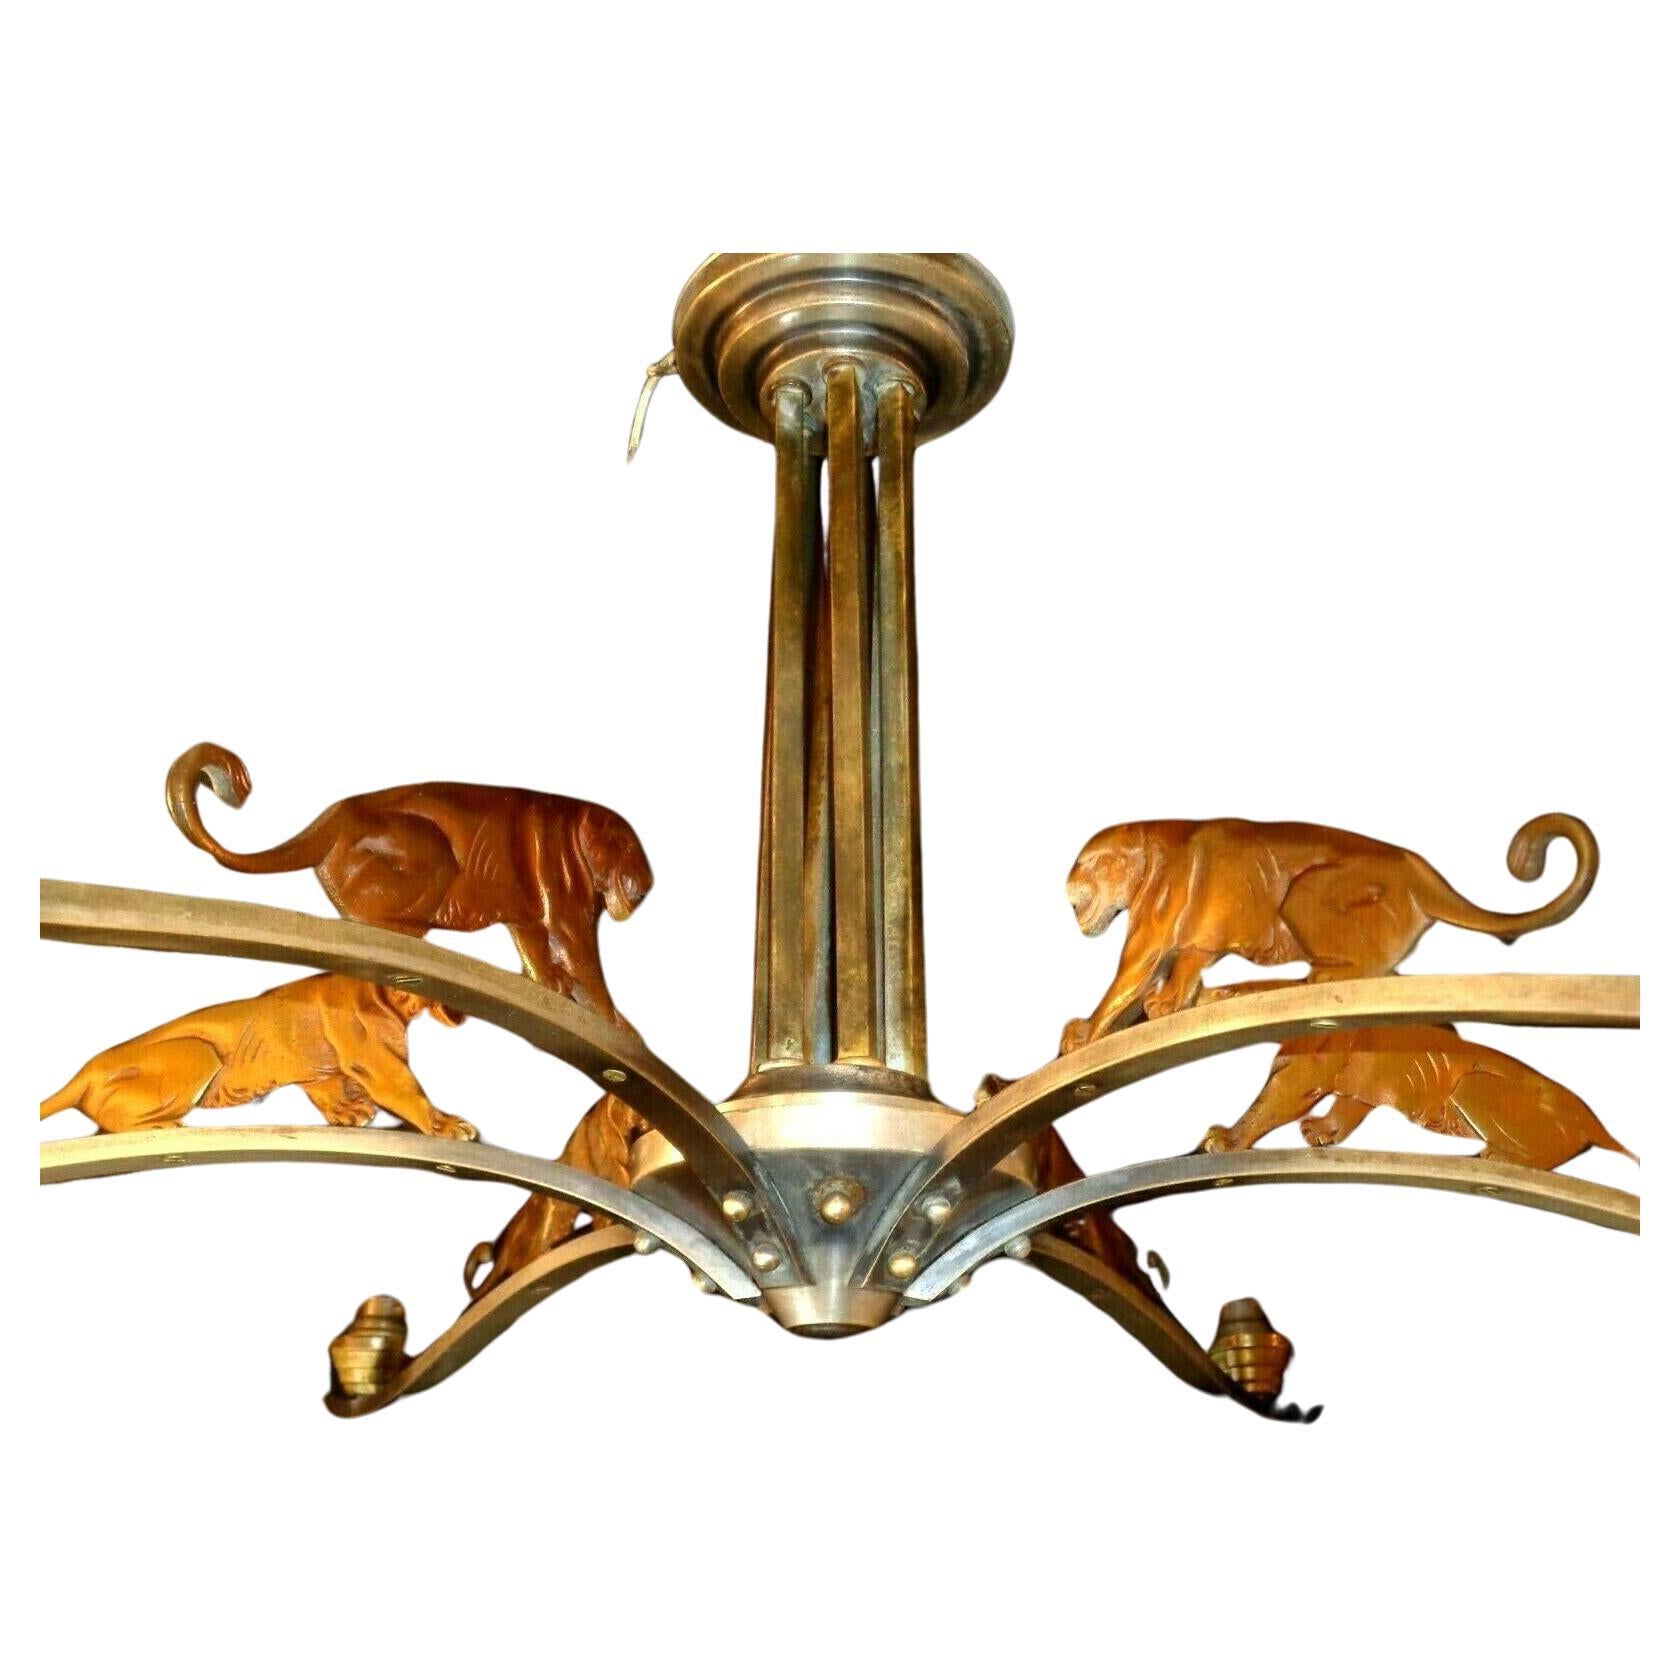 Absolutely stunning Bronze Roaring Tigers Prancing across a Nickel Framed Chandelier. Look at the detailed bronze panthers prowling.